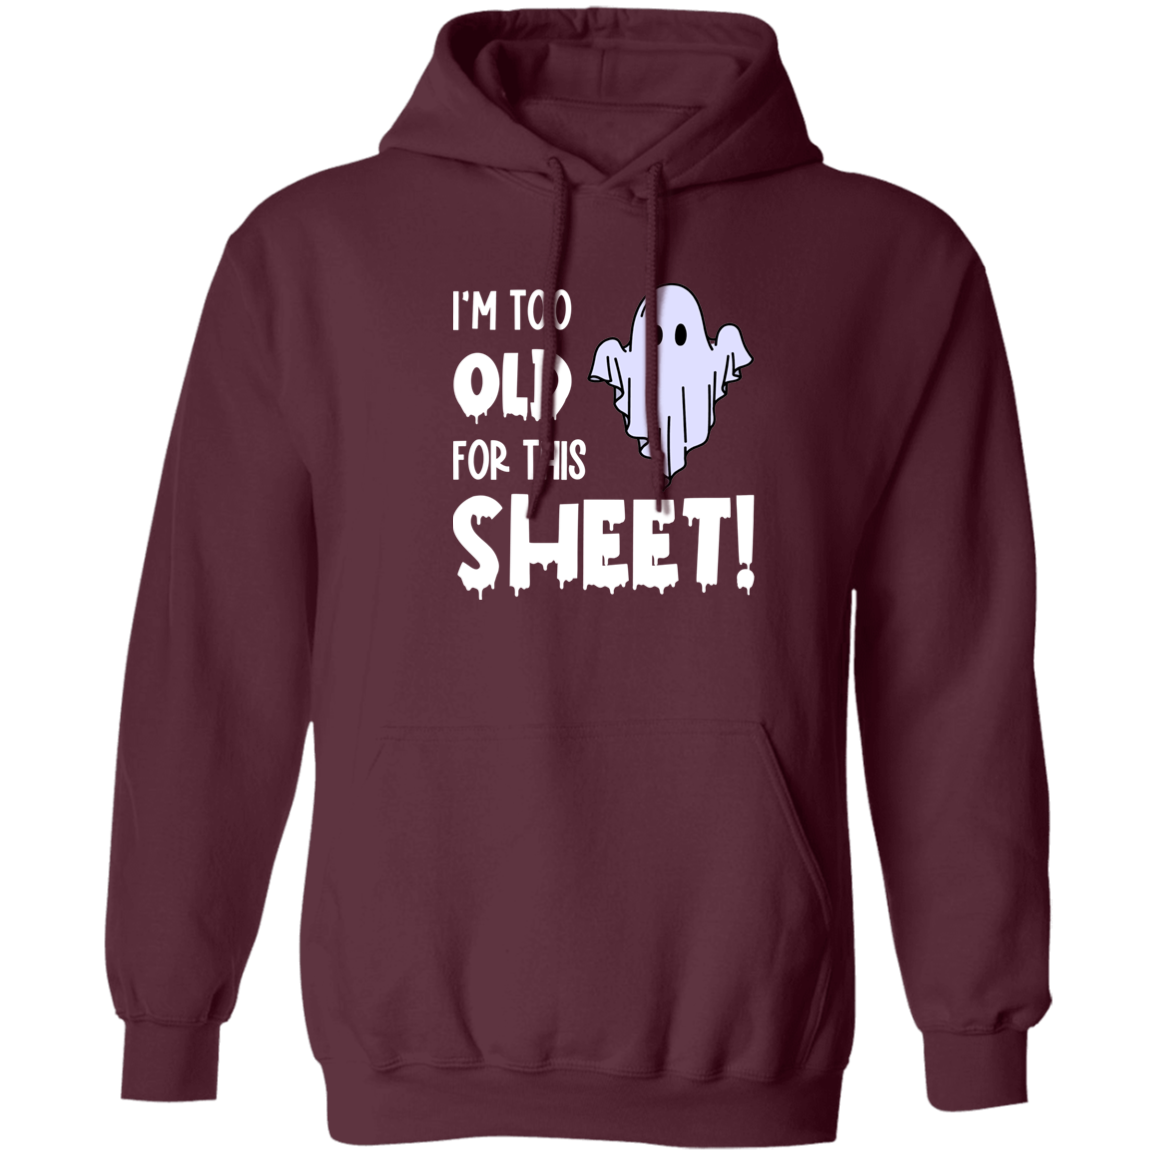 Too Old for this Sheet! Unisex Pullover Hoodie